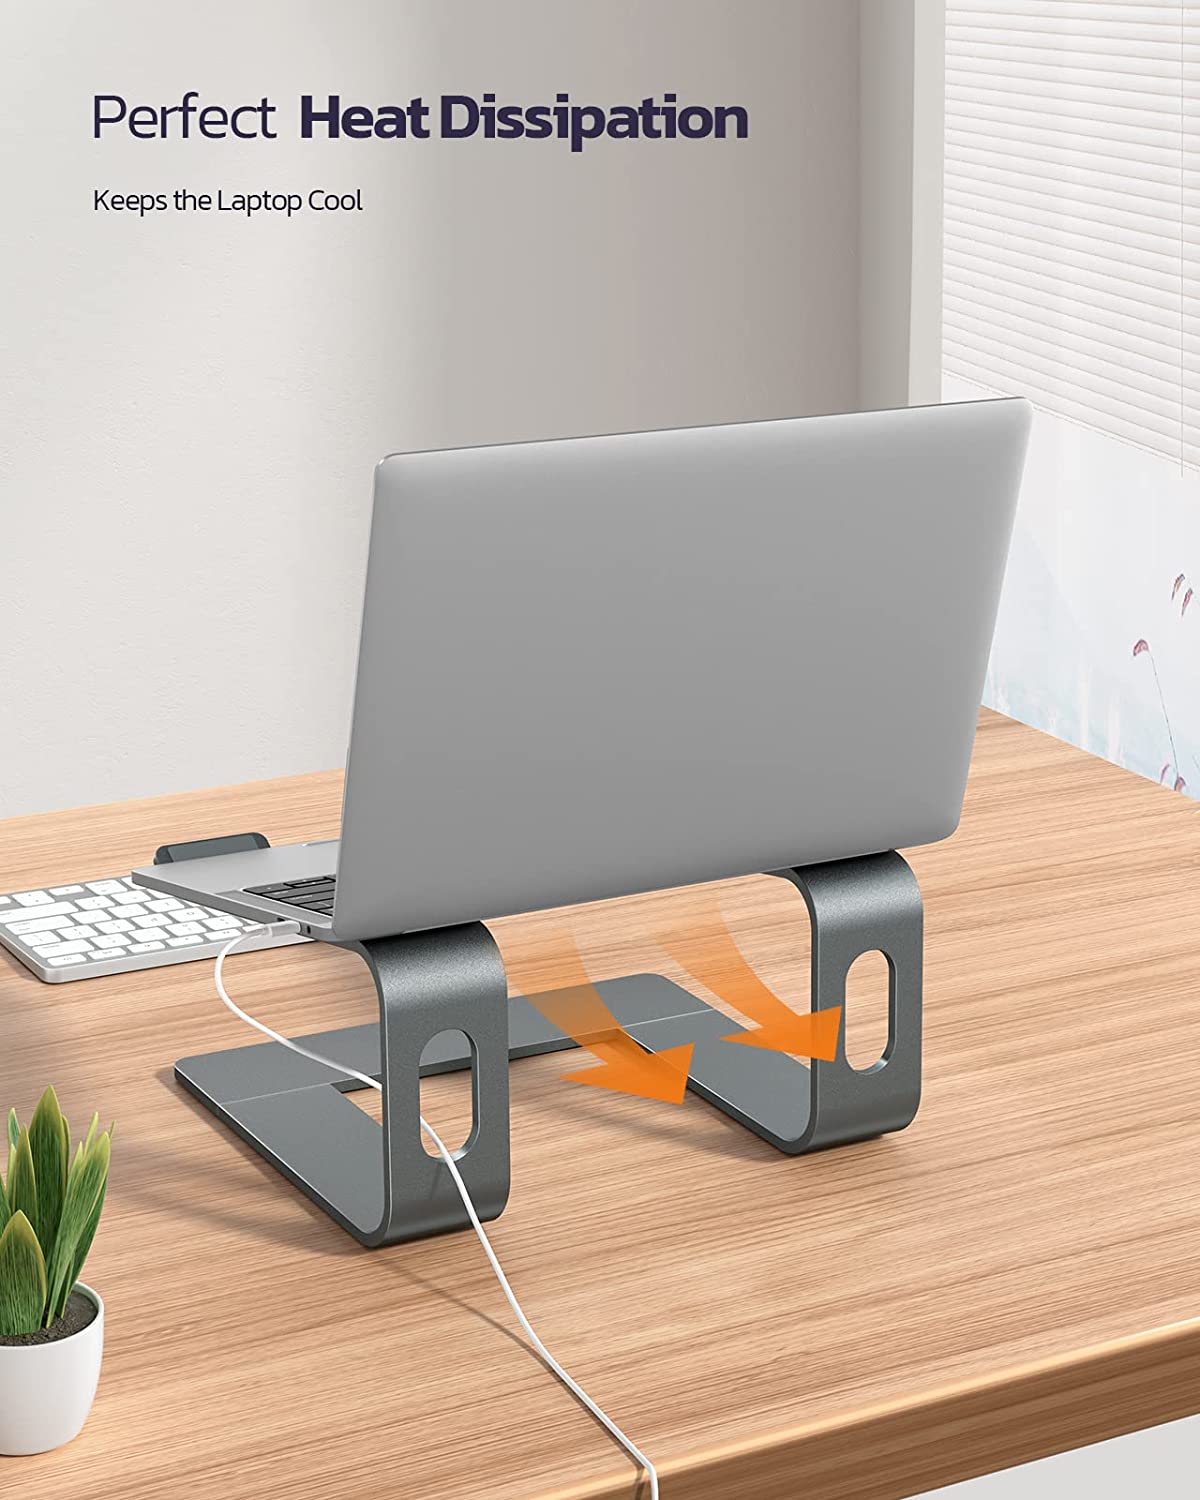 Nulaxy Laptop Stand, Ergonomic Aluminum Laptop Computer Stand, Detachable Laptop Riser Notebook Holder Stand Compatible with MacBook Air Pro, Dell XPS, HP, Lenovo More 10-15.6” Laptops- Grey - image 3 of 7